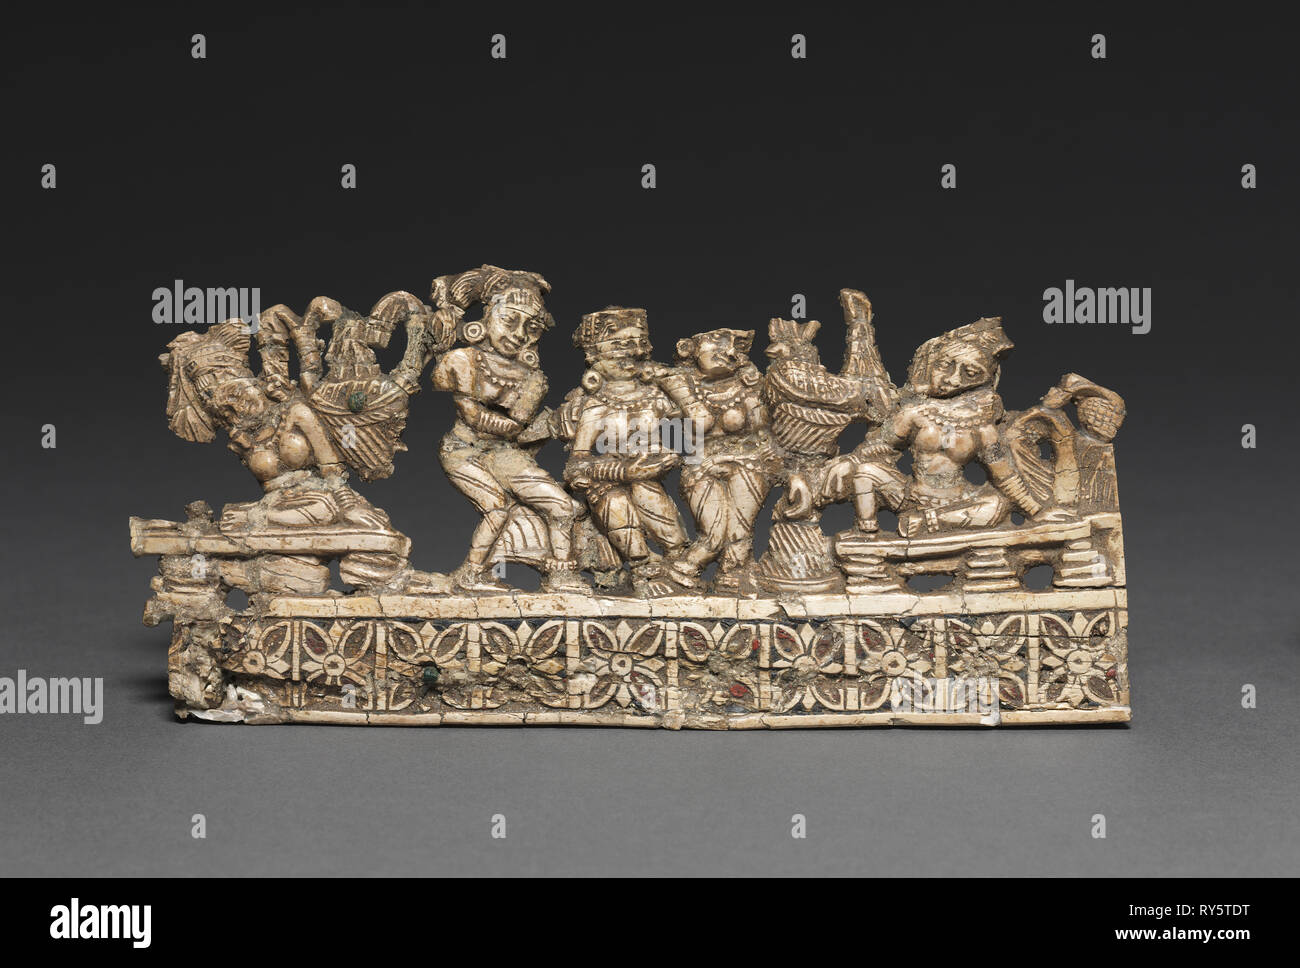 Ladies Entertained by Dancers, 1-200. Afghanistan, Begram, Kushan Period (1st century-320). Ivory; overall: 7.5 x 17 cm (2 15/16 x 6 11/16 in Stock Photo